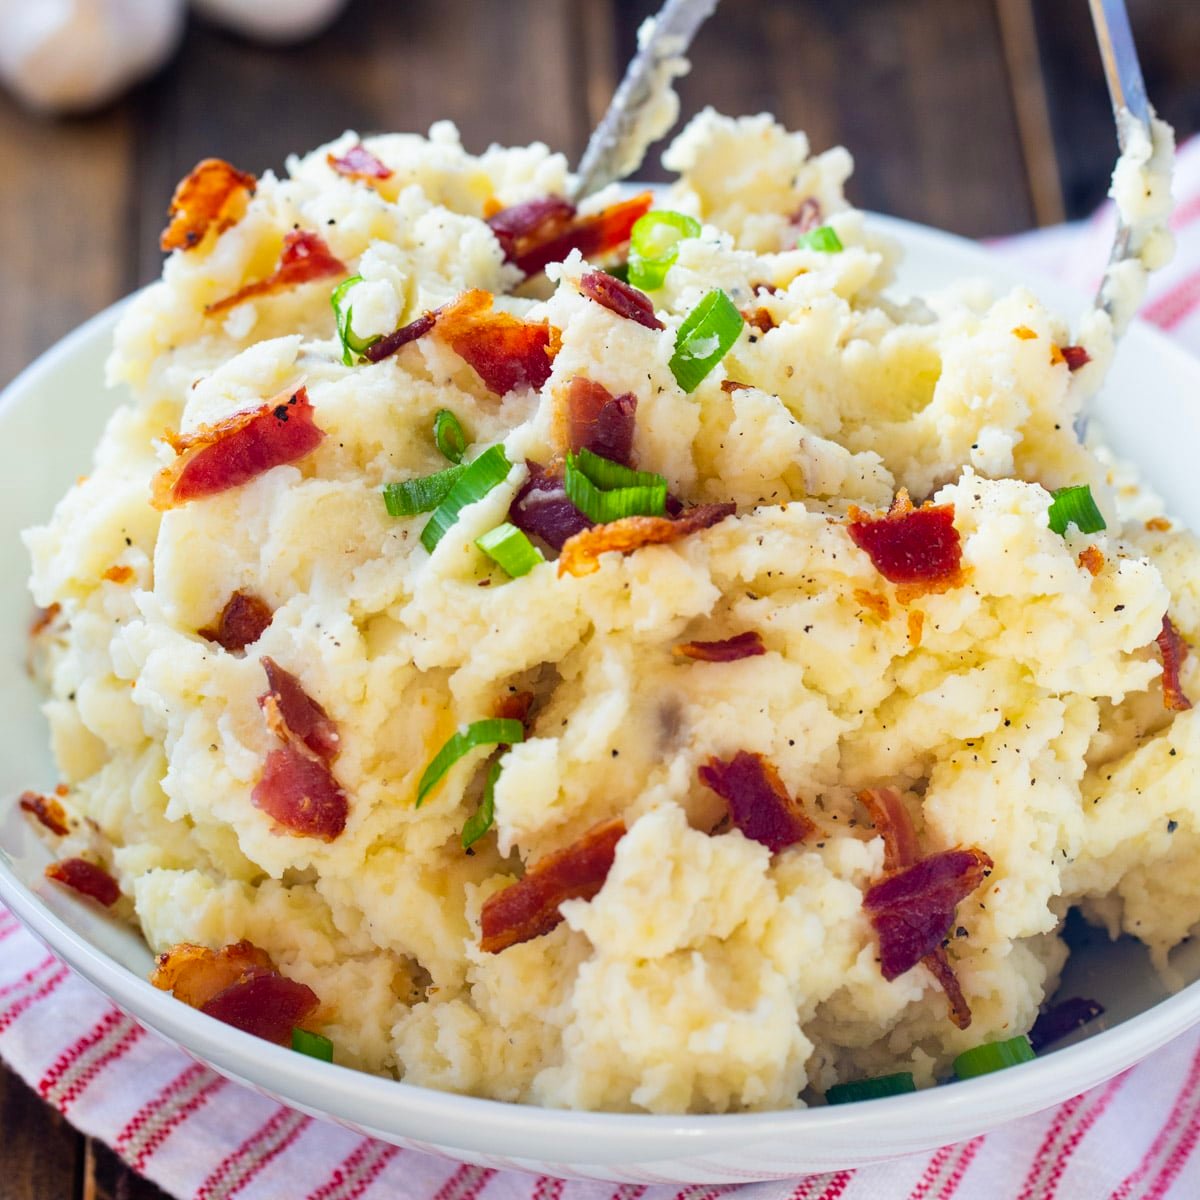 https://spicysouthernkitchen.com/wp-content/uploads/2014/11/Roasted-Grlic-and-Bacon-Mashed-Potatoes-3-1.jpg